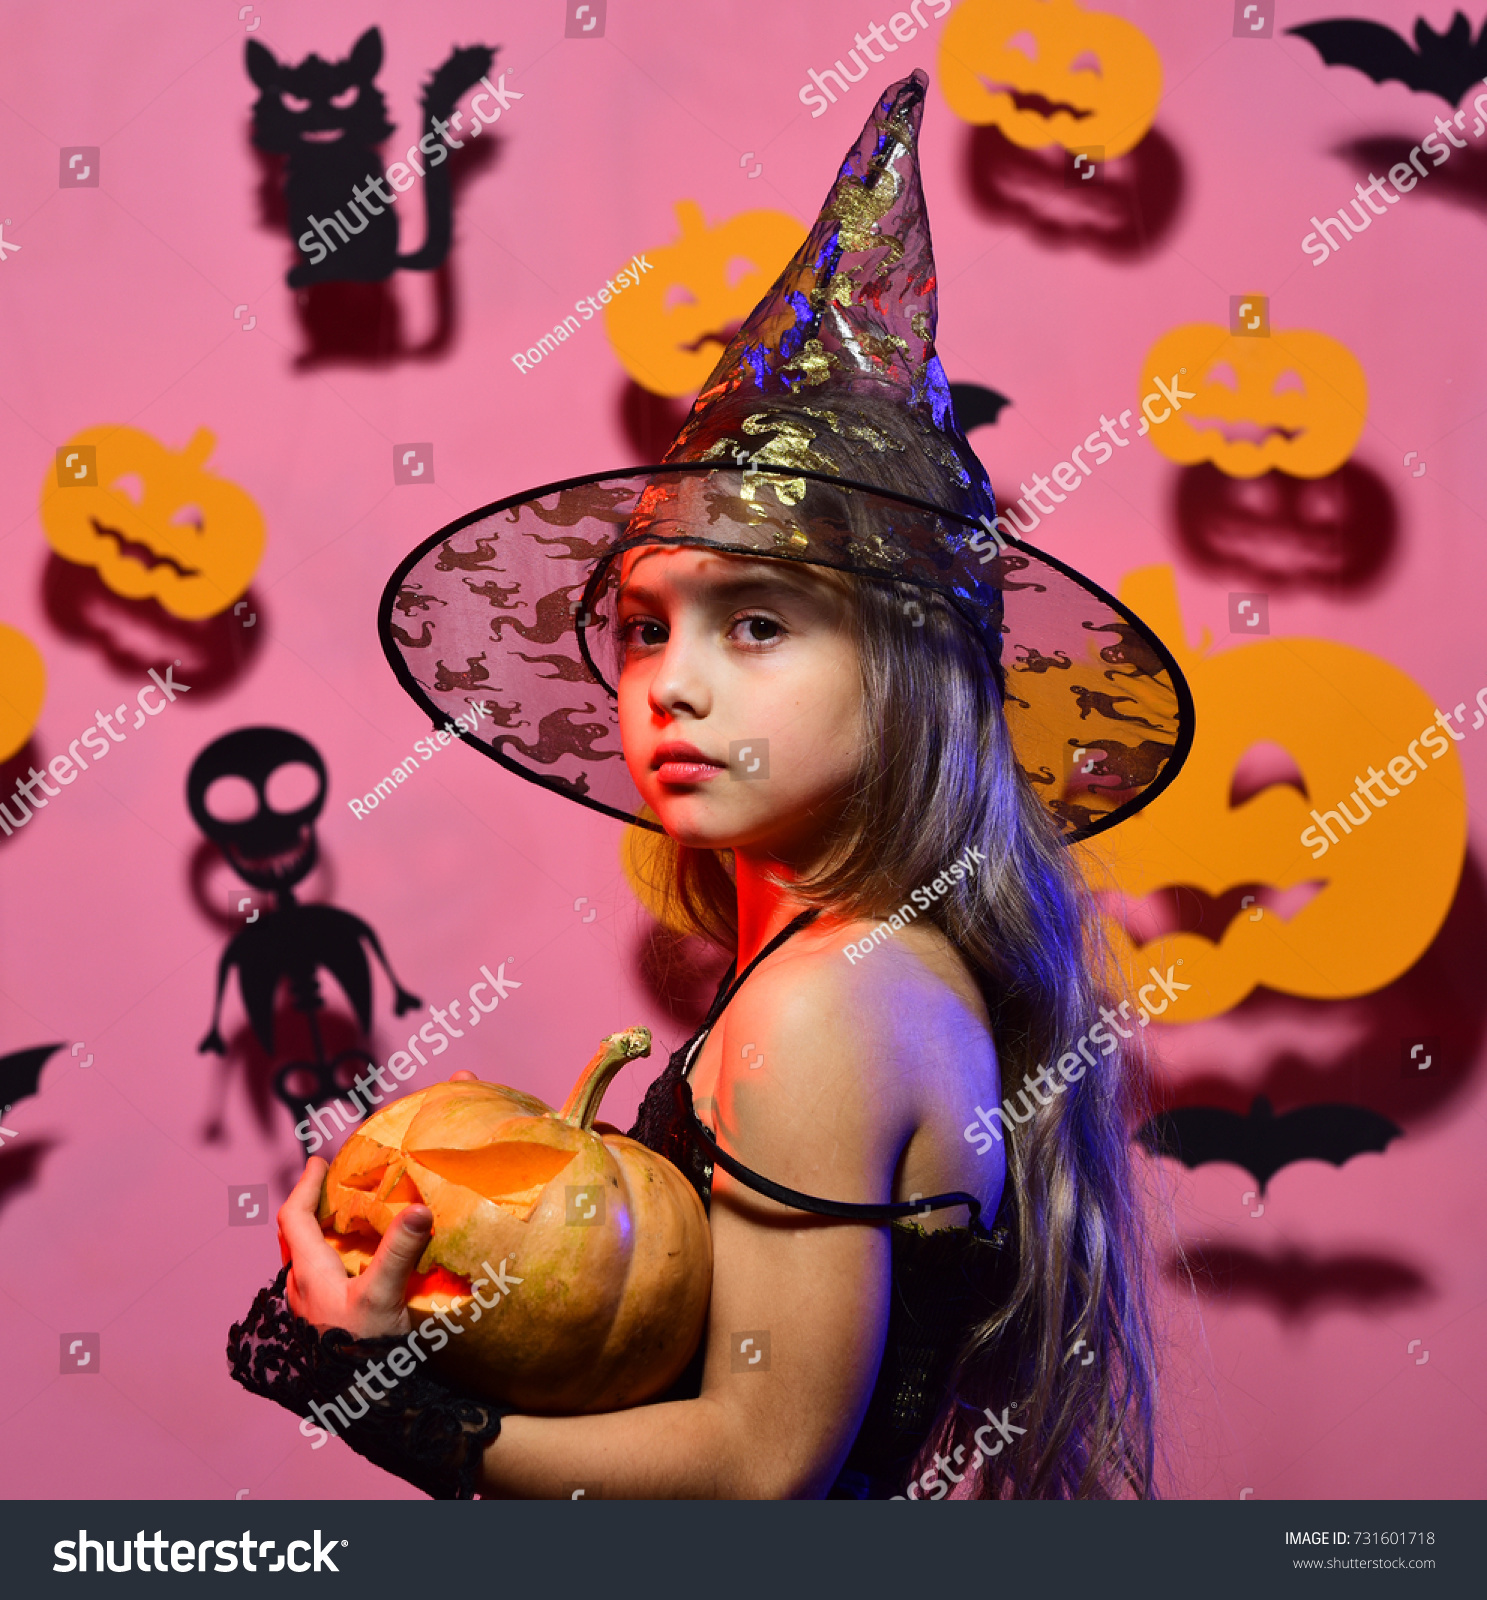 Little witch wearing black hat. Girl with calm face on pink background with bats and pumpkins decor. Halloween party and decorations concept. Kid in spooky witches costume holds carved pumpkin #731601718